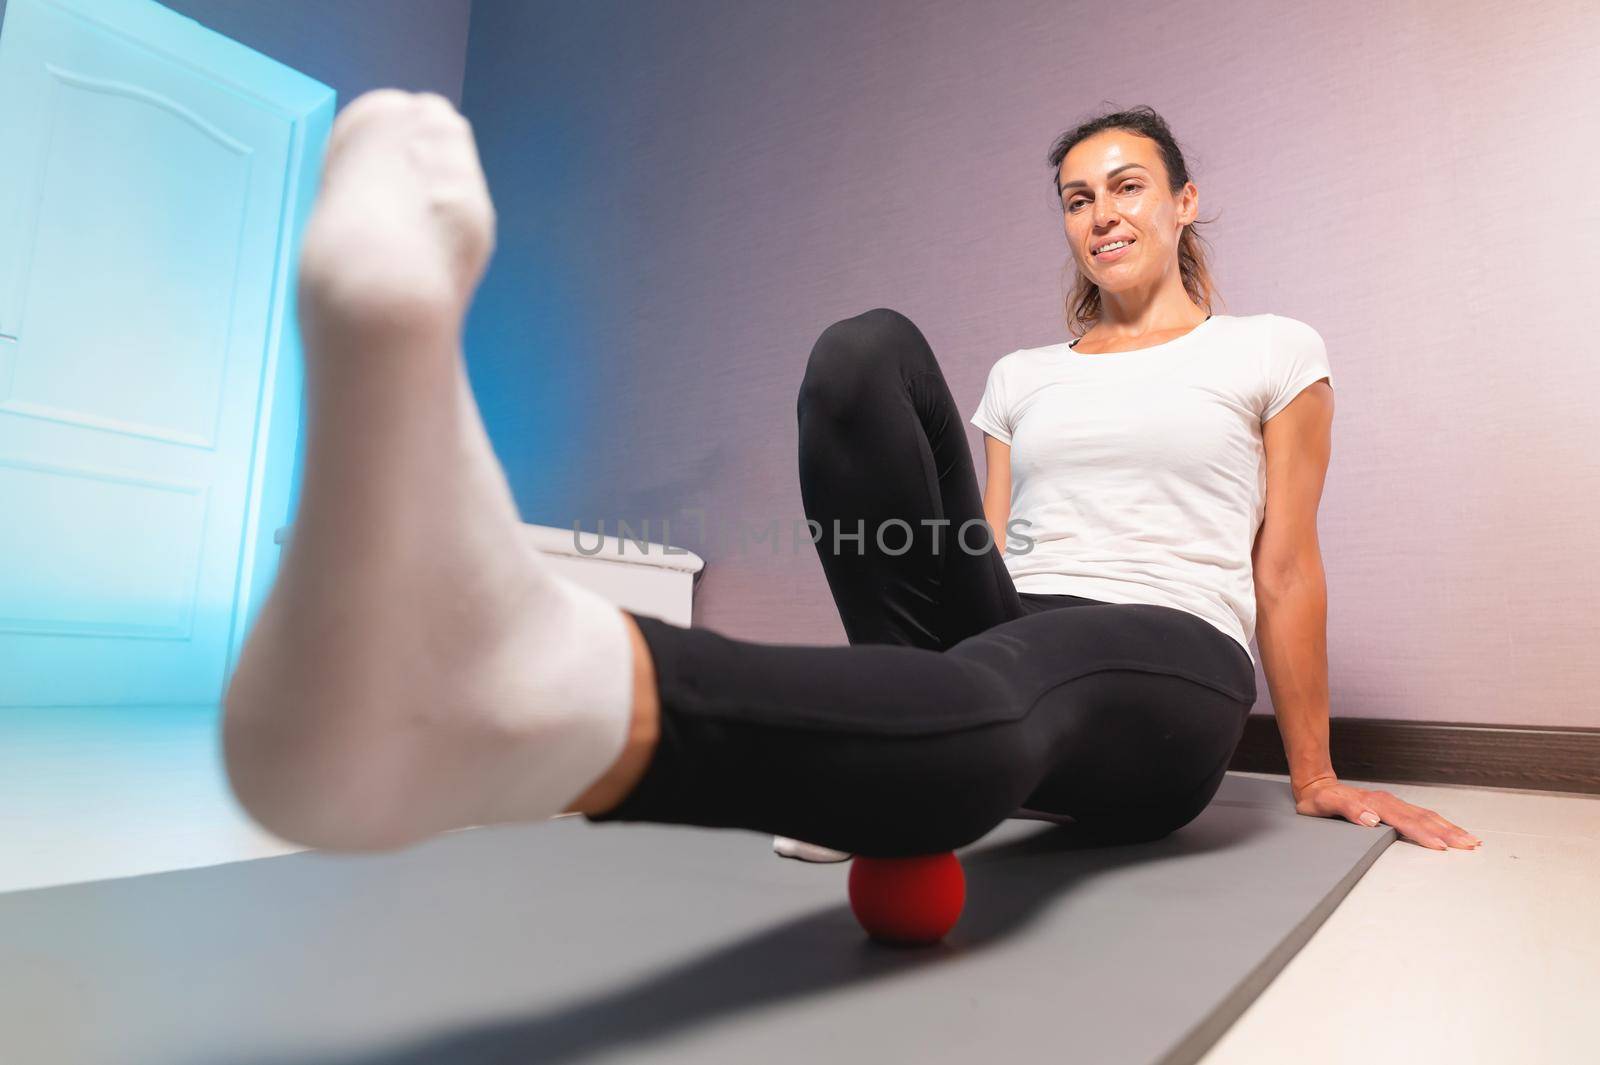 Young attractive woman doing exercises, wide angle view from below, indoor workout at home.